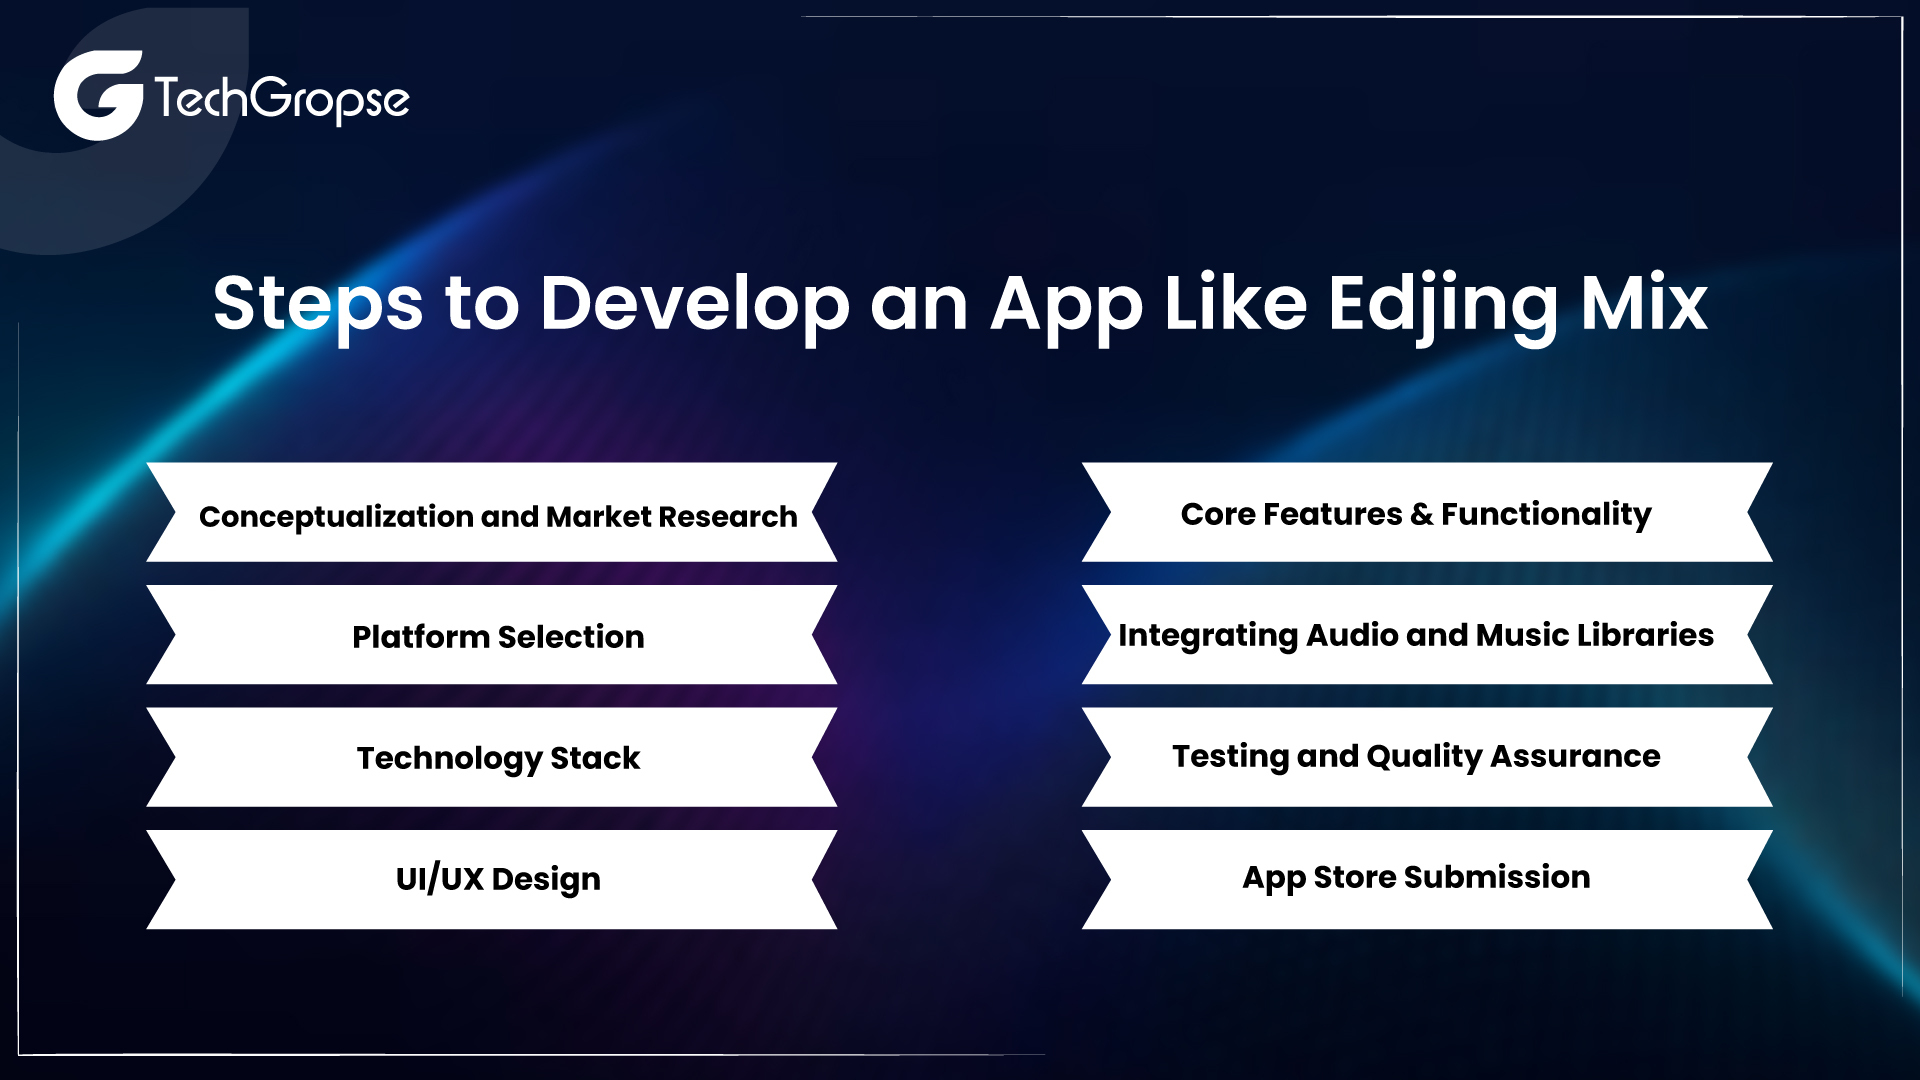 What Are the Steps to Develop an App Like Edjing Mix? 